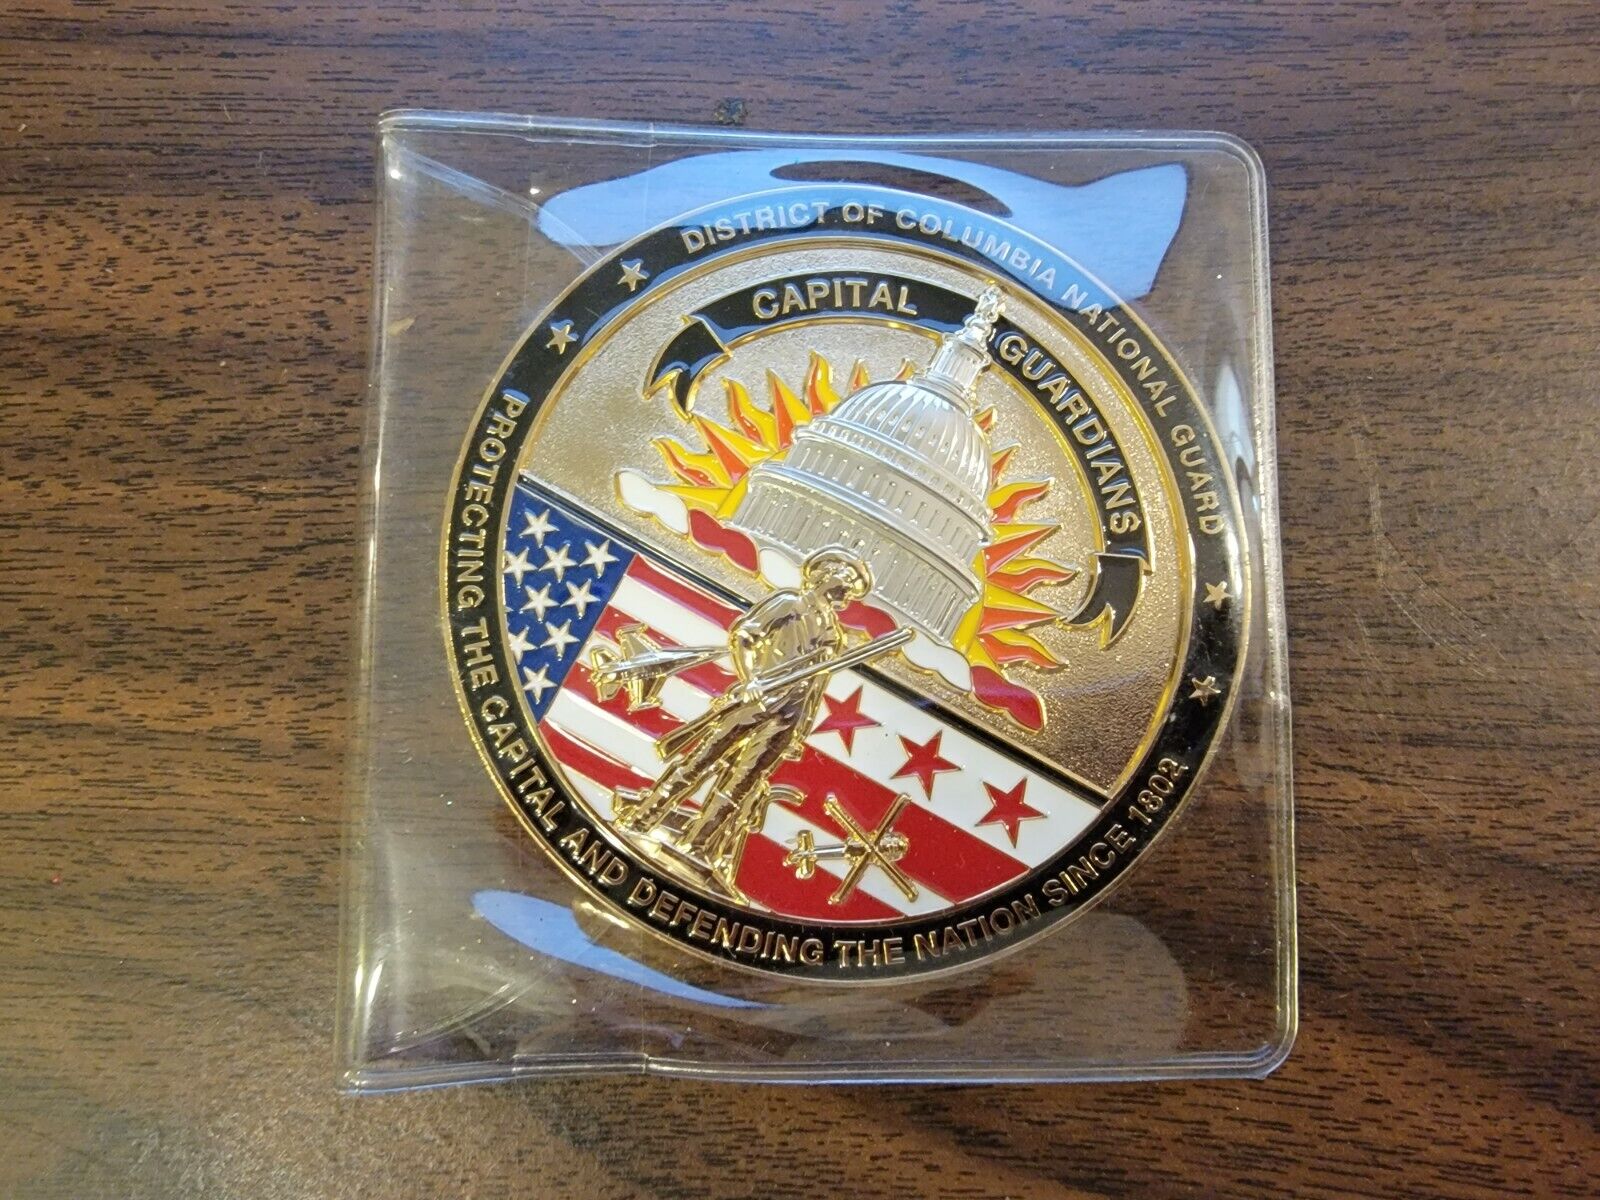 District of Columbia National Guard Challenge Coin, Gold Color, Textured, Enamel